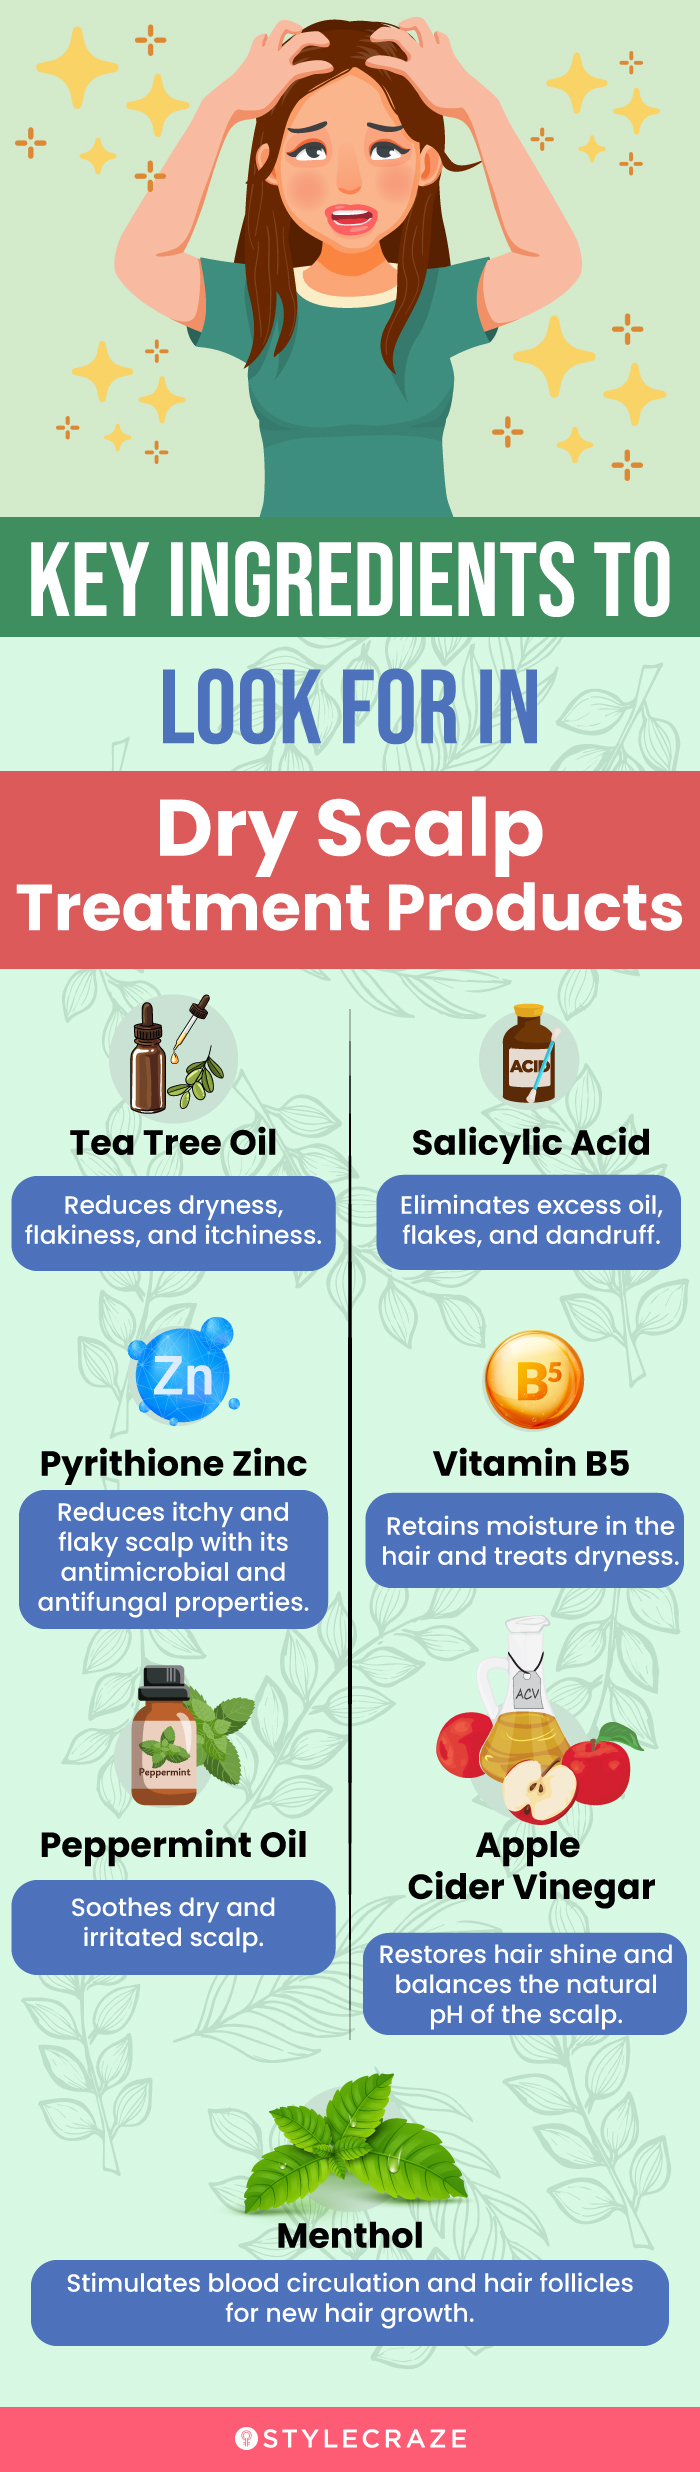 Key Ingredients To Look For In Dry Scalp Treatment Products (infographic)